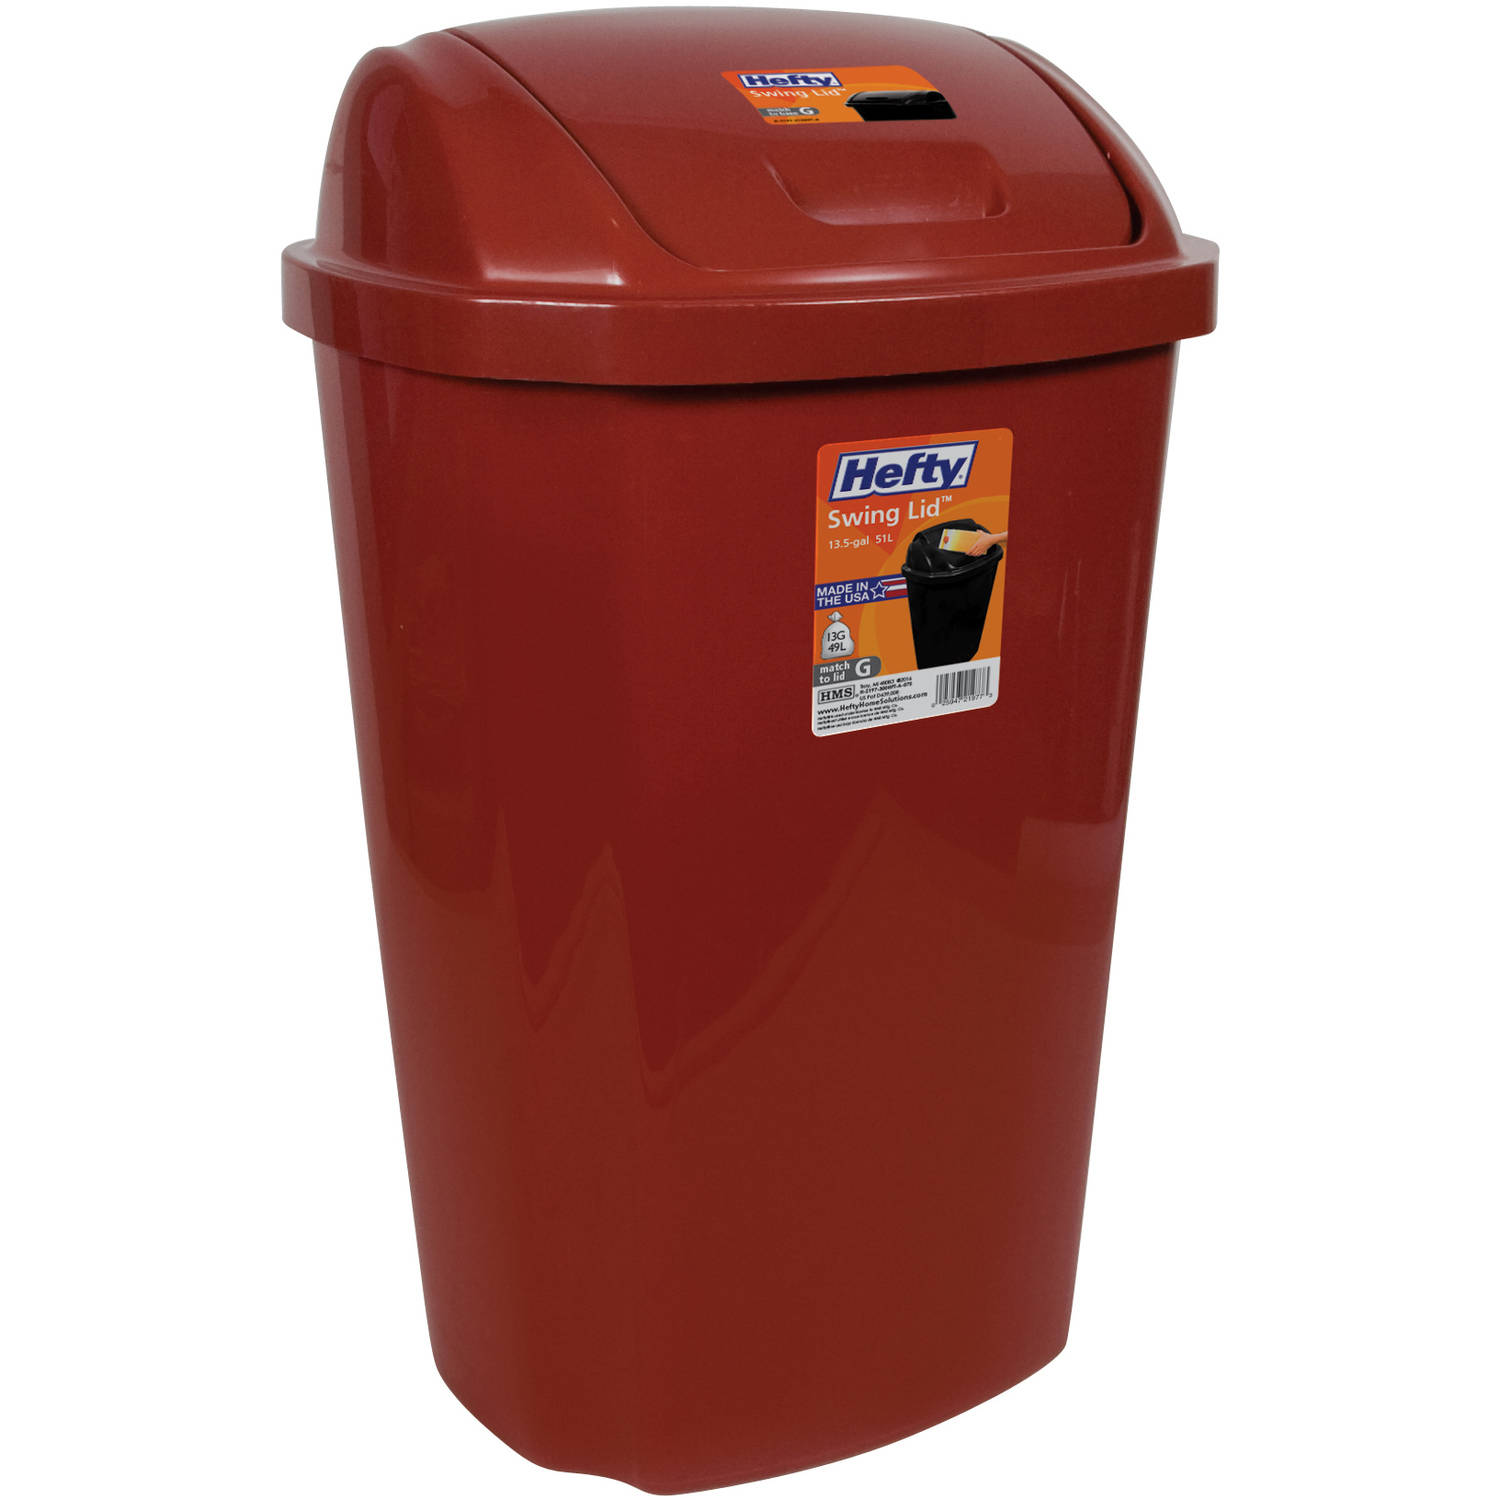 Hefty Swing-Lid 13.5-Gallon Trash Can, Multiple Colors - image 1 of 4